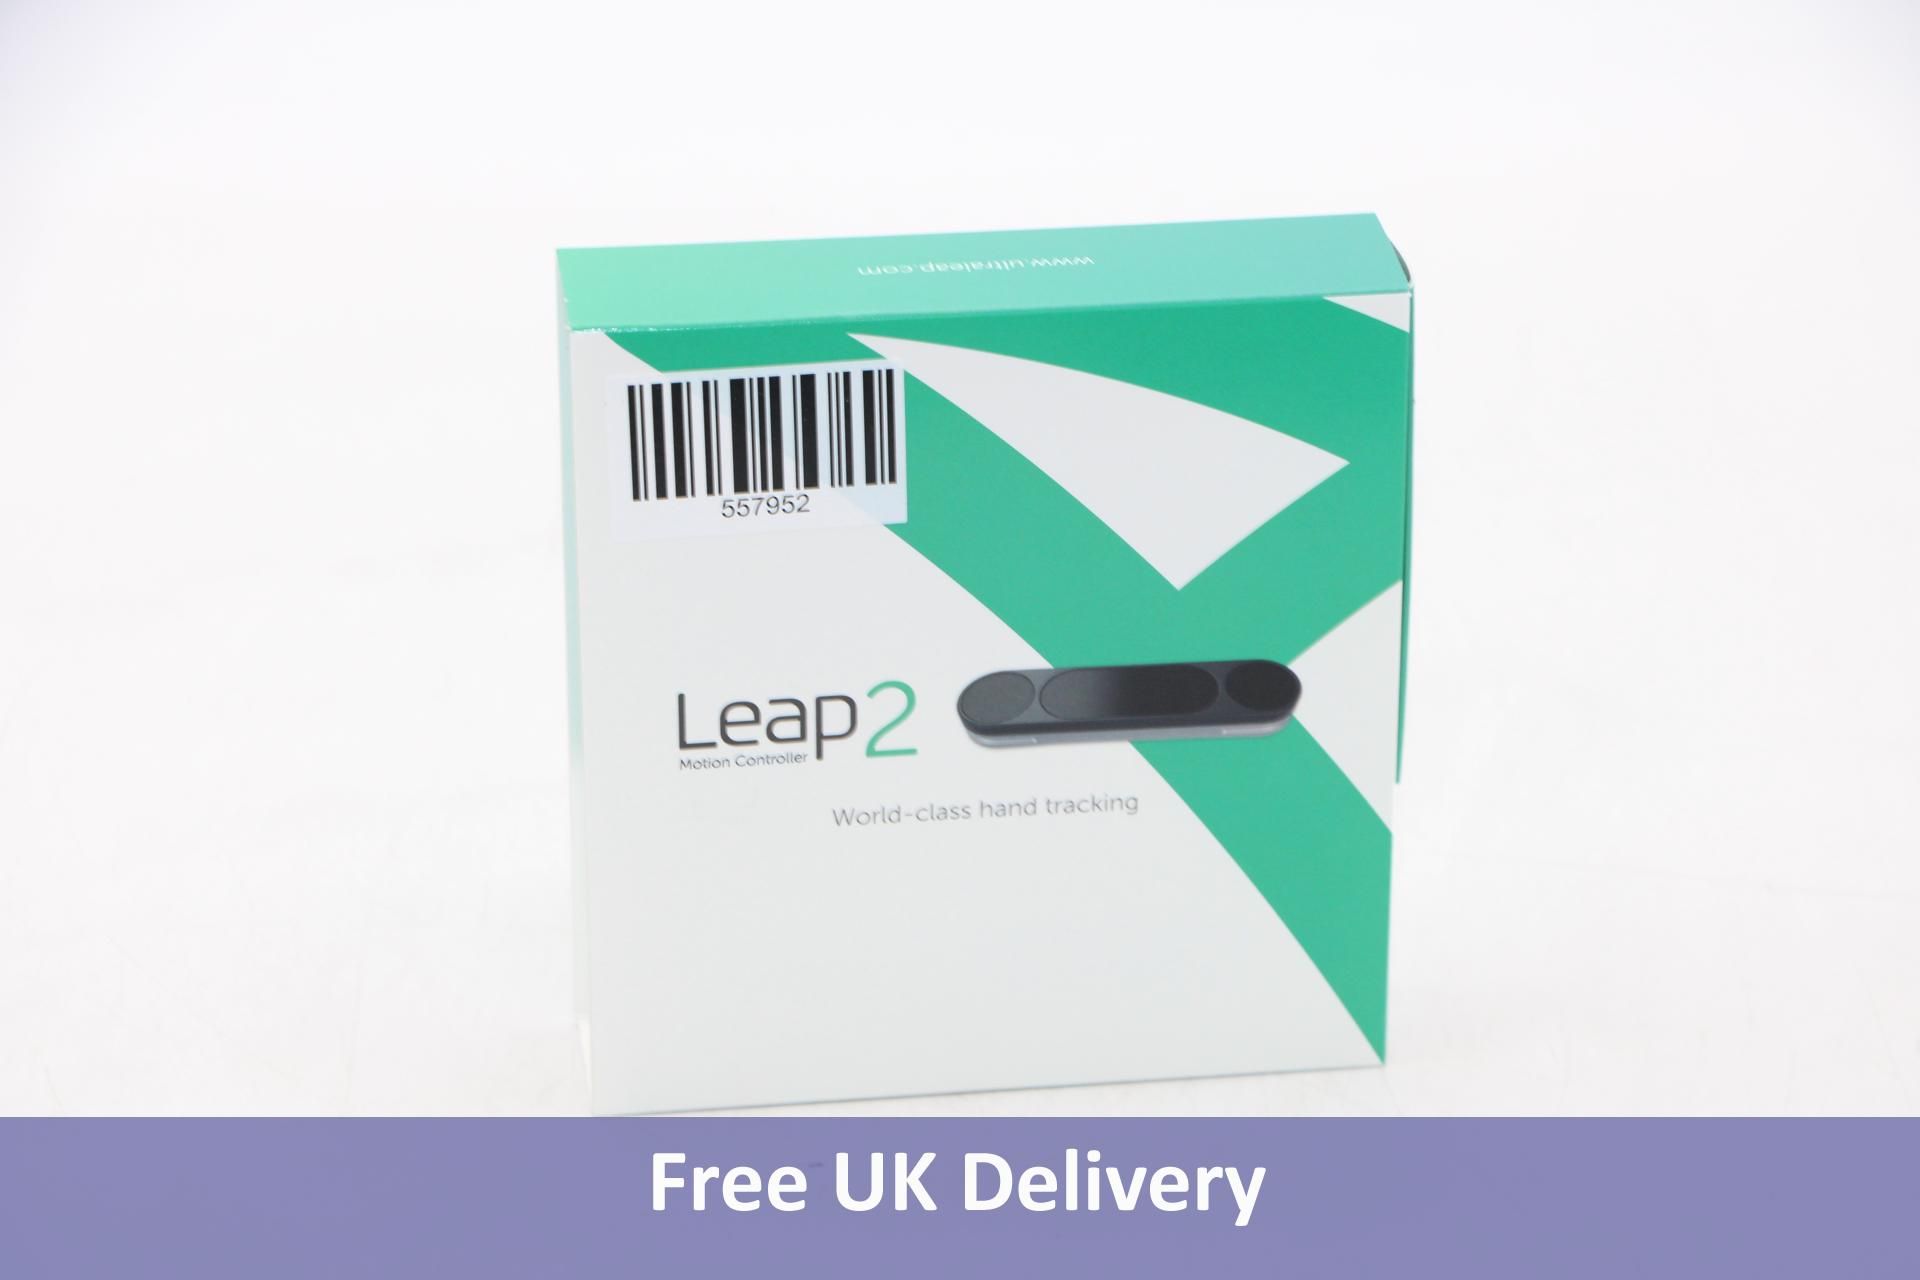 Five Ultraleap Leap Motion Controller 2. New, sealed. Total RRP £715 - Image 4 of 5